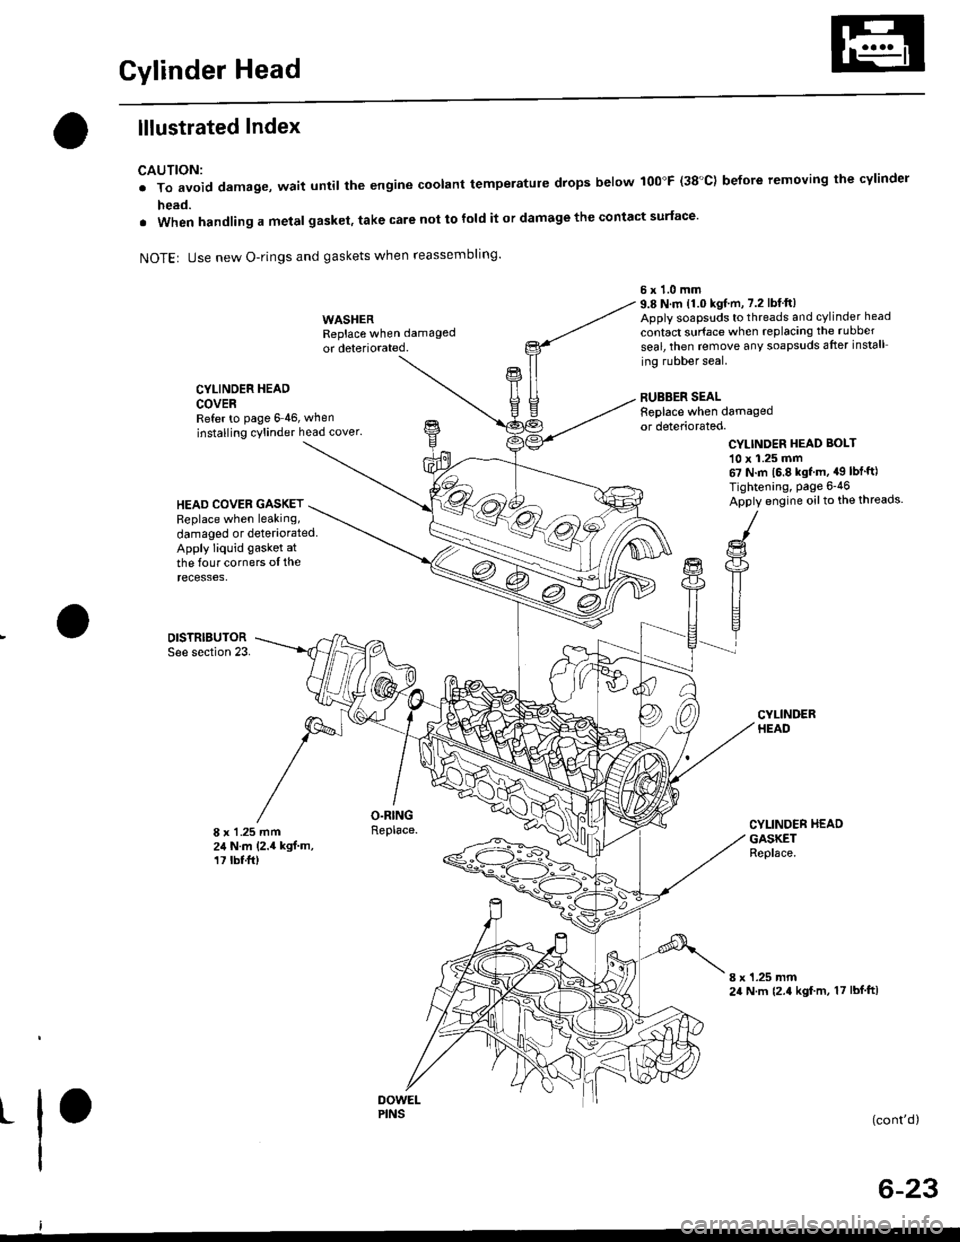 HONDA CIVIC 1999 6.G Workshop Manual Gylinder Head
lllustrated Index
CAUTION:
. To avoid damage, wait until the engine coolant temperatule drops below 100"F (38C) before removing the cylinder
head.
. When handling a metal gasket, take c